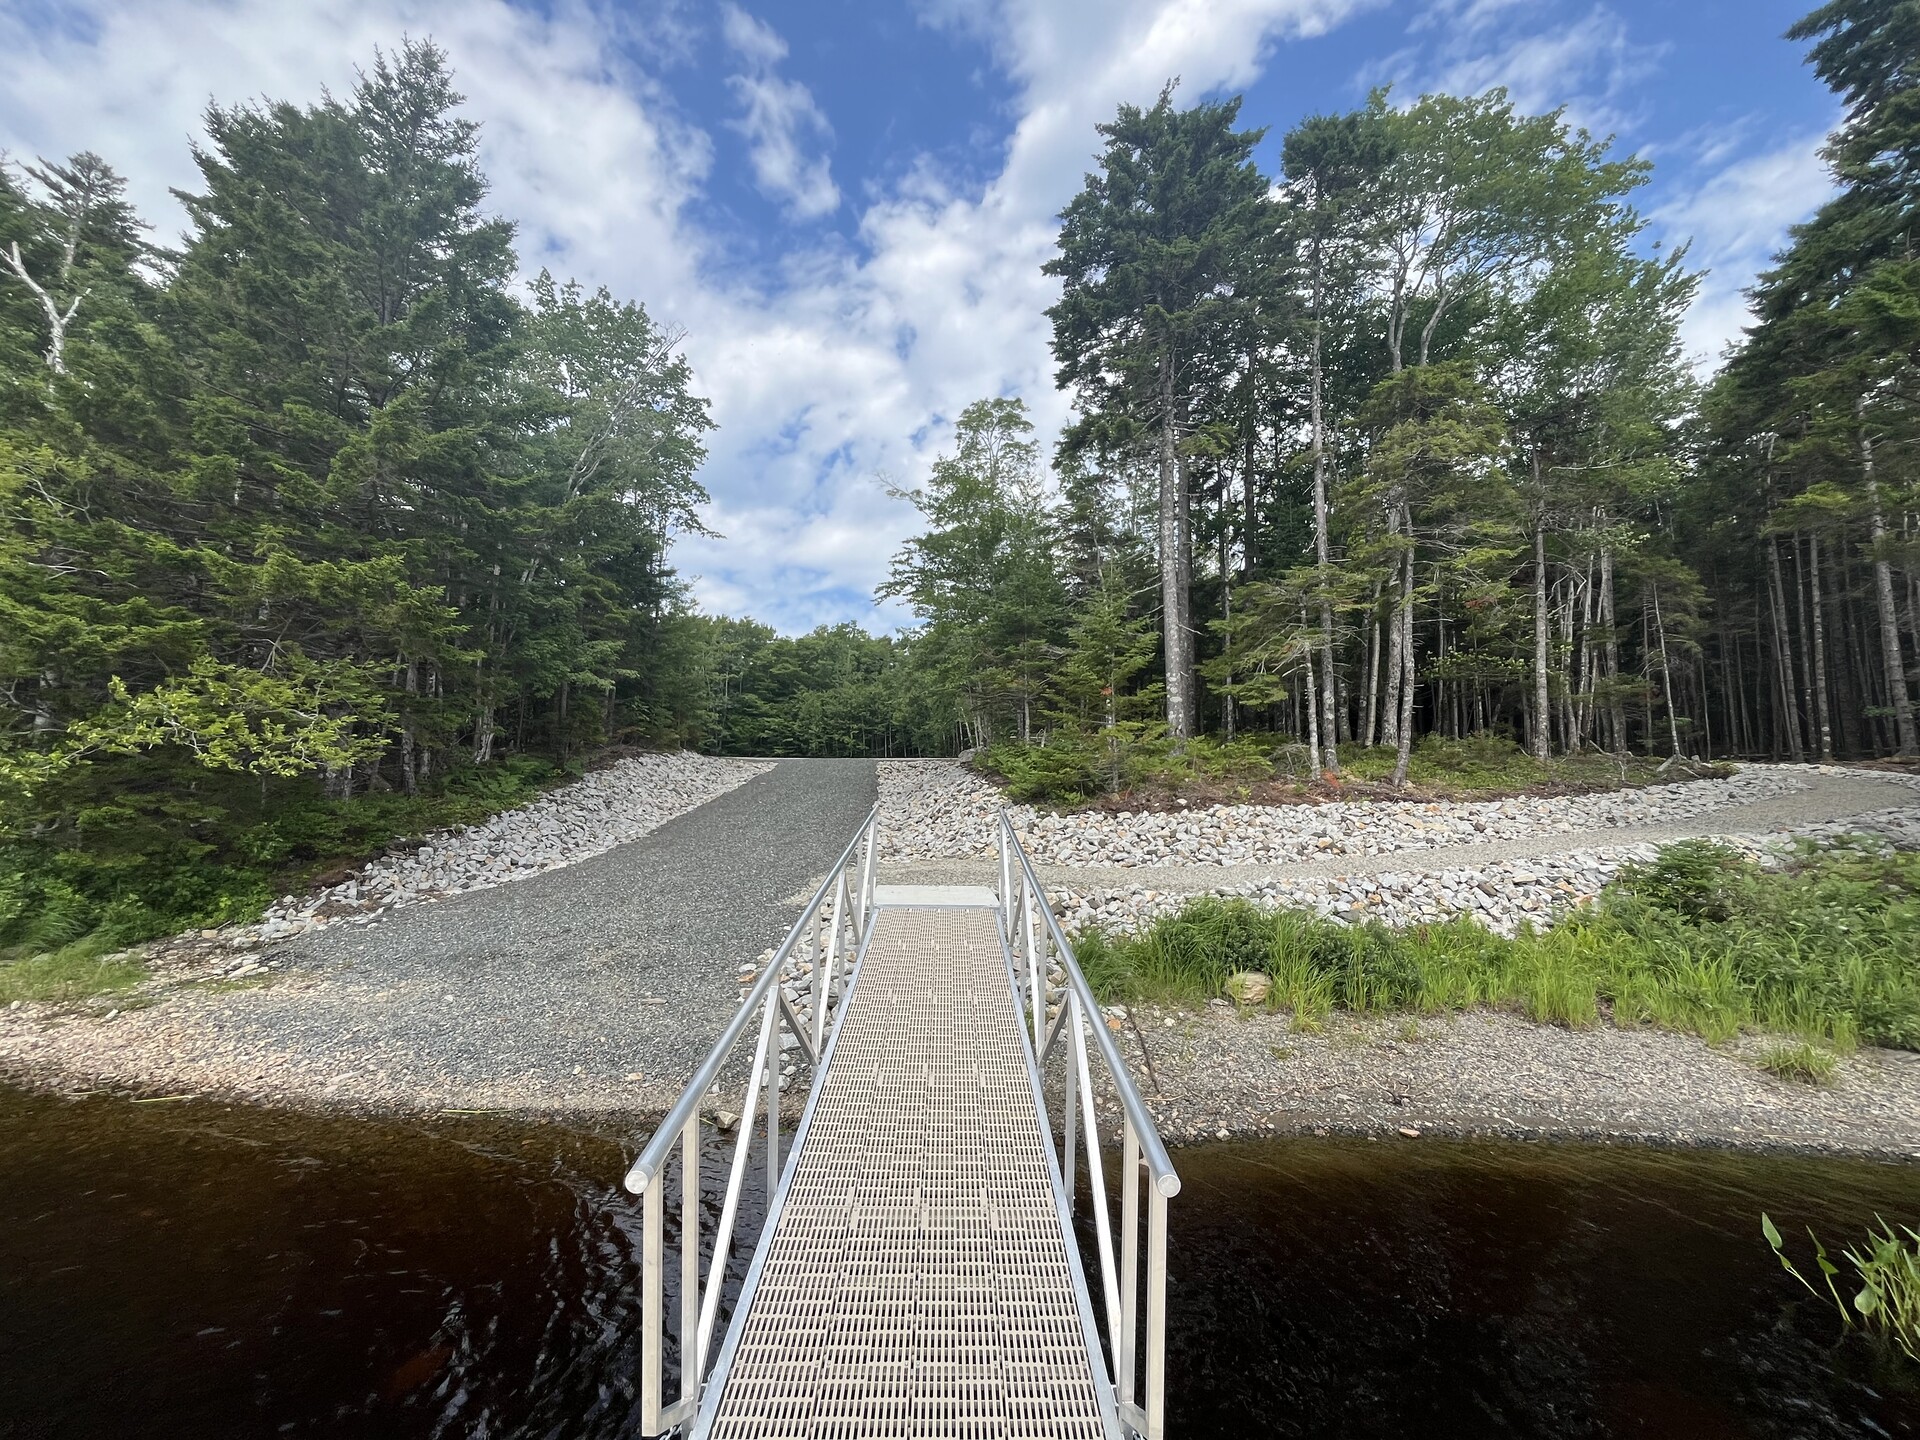 The new boat launch and accessible trail to the new accessible kayak launch at Wentworth Park.